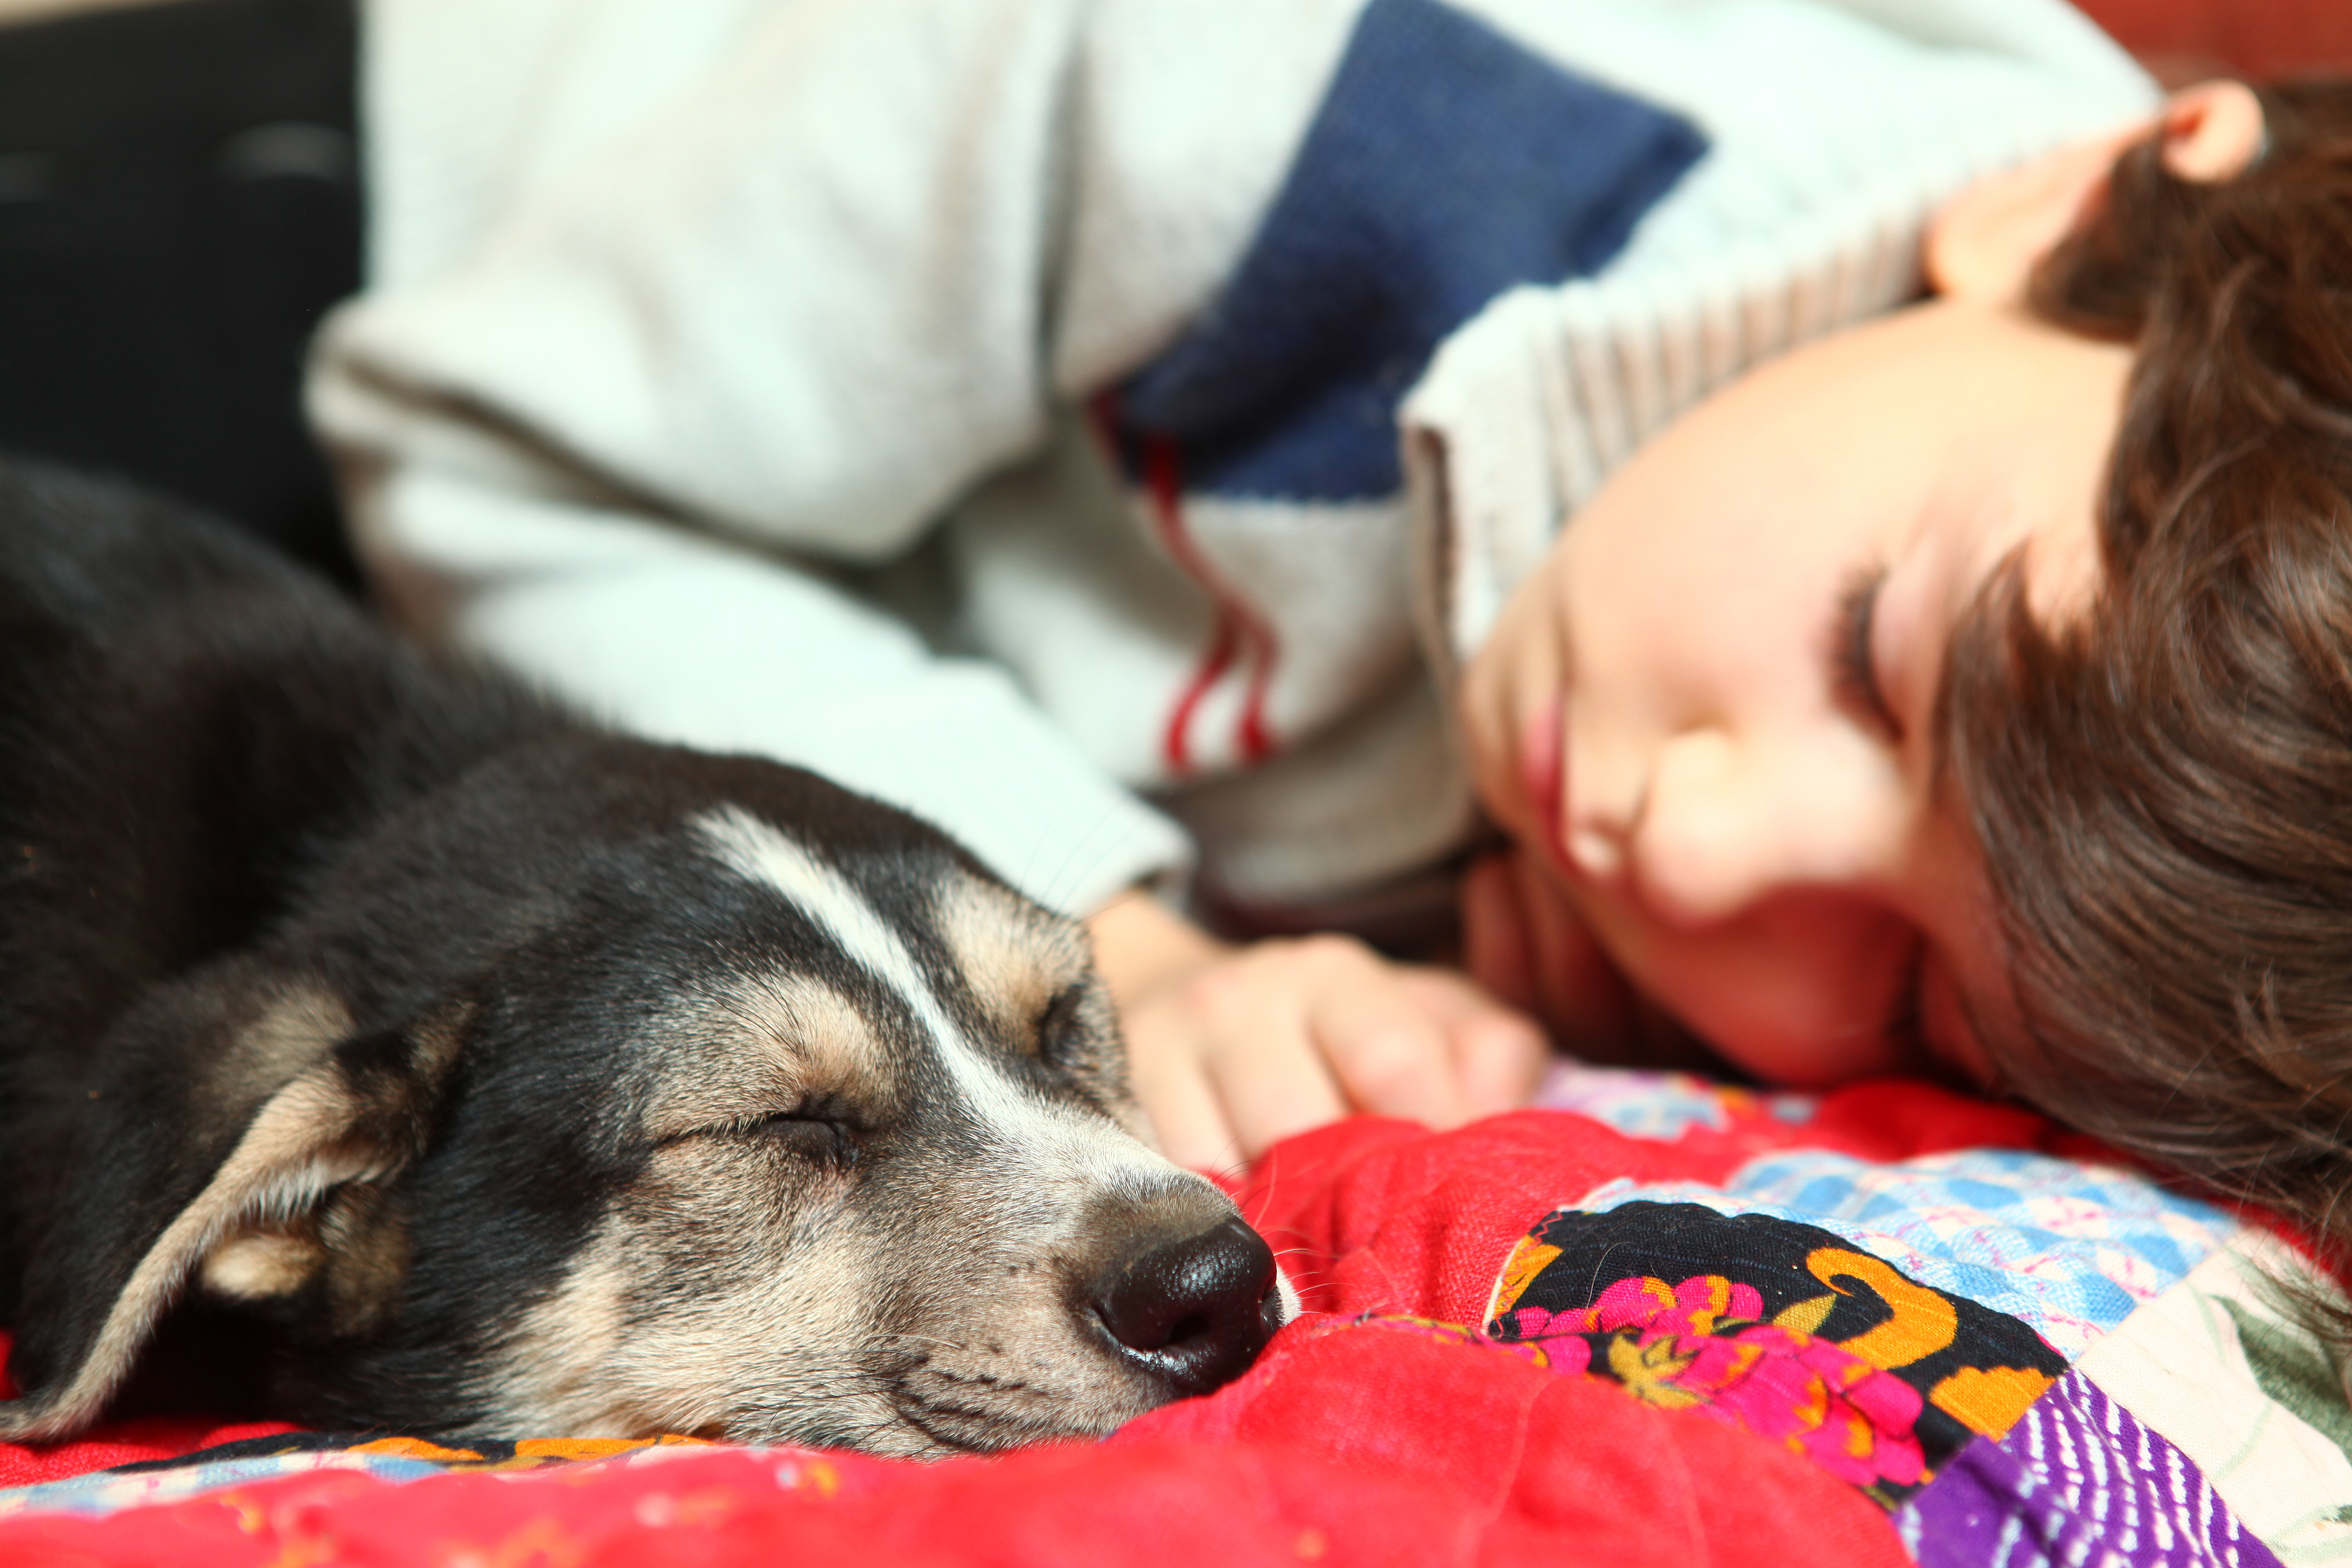 The boy is sleeping with a puppy | Source: Shutterstock.com